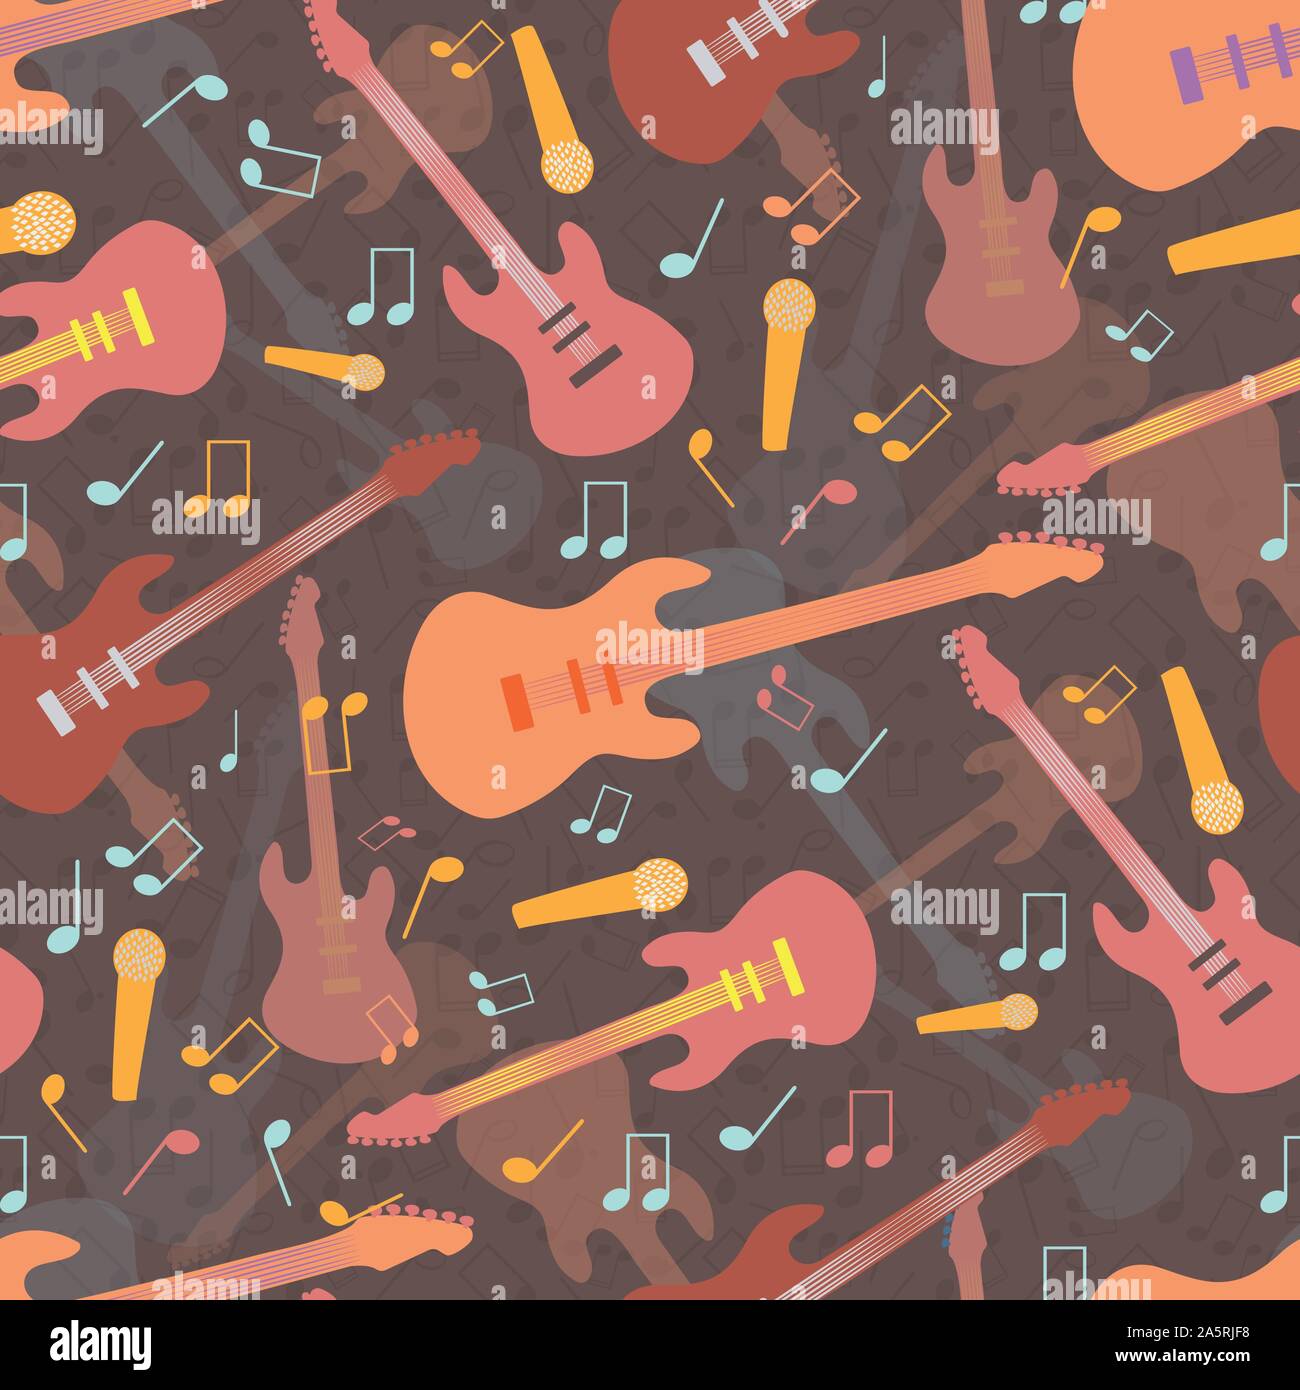 Beautiful mellow guitar and music design in multicolor hues of orange and pink. Seamless vector pattern on warm brown layered background. Great for Stock Vector